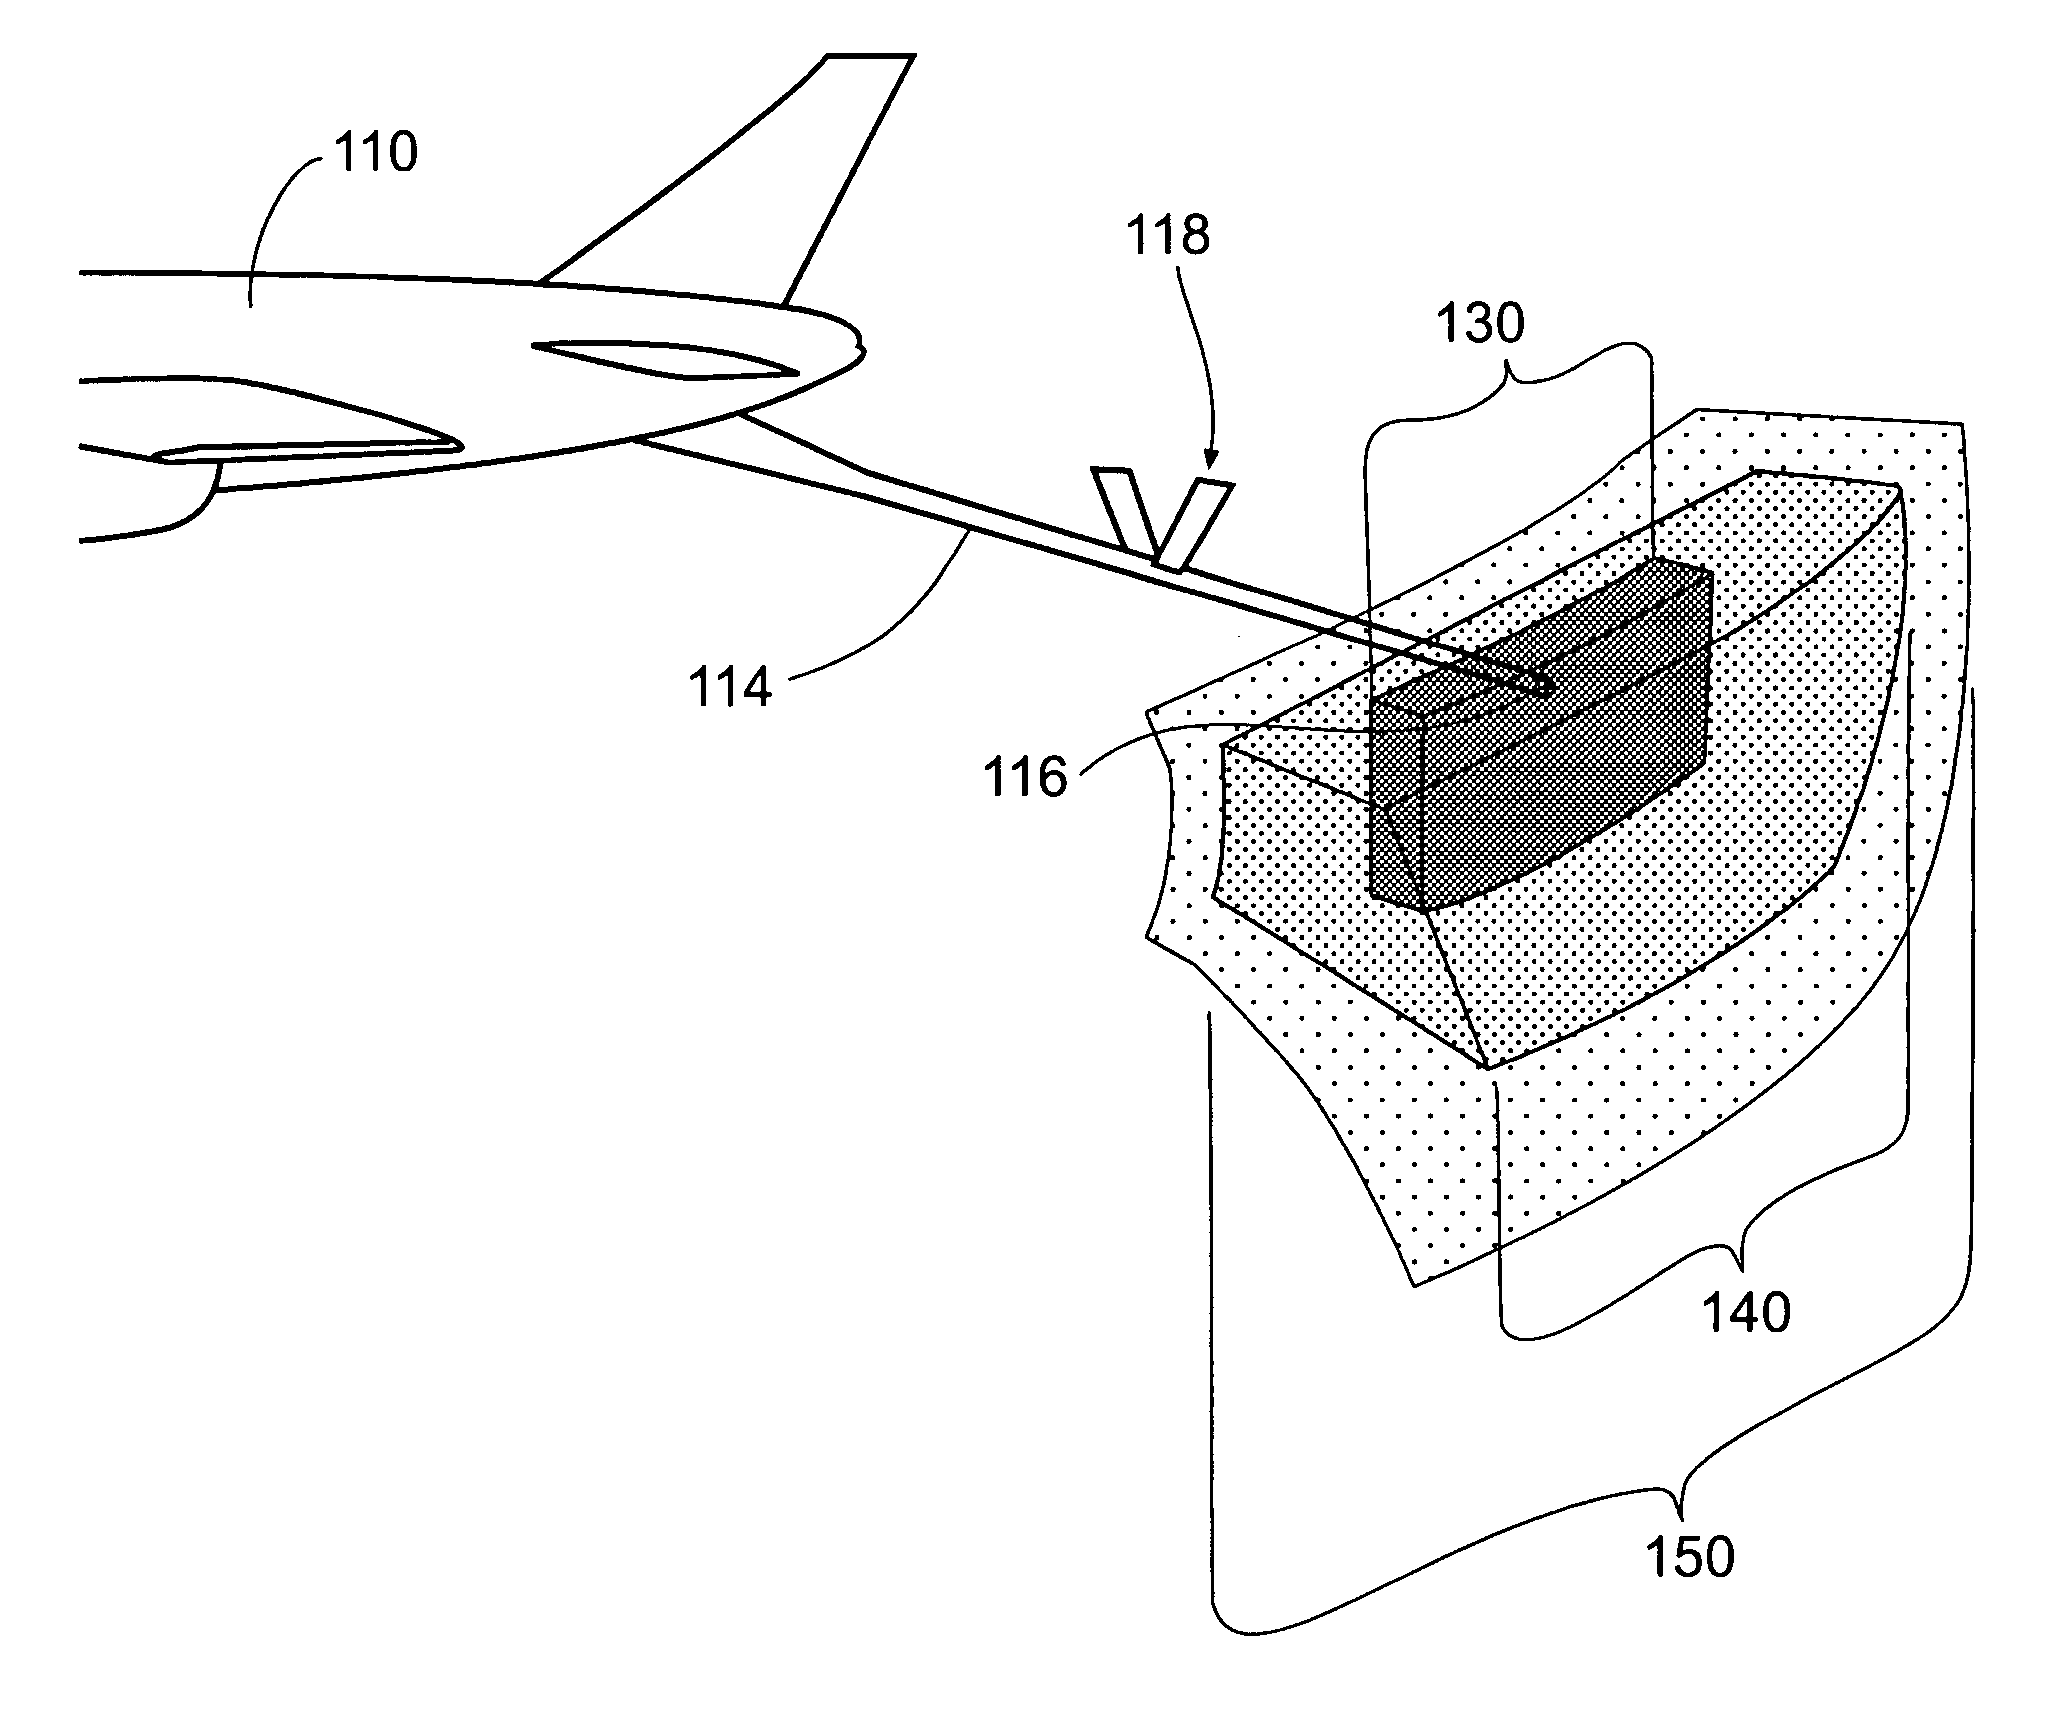 Positioning system, device, and method for in-flight refueling